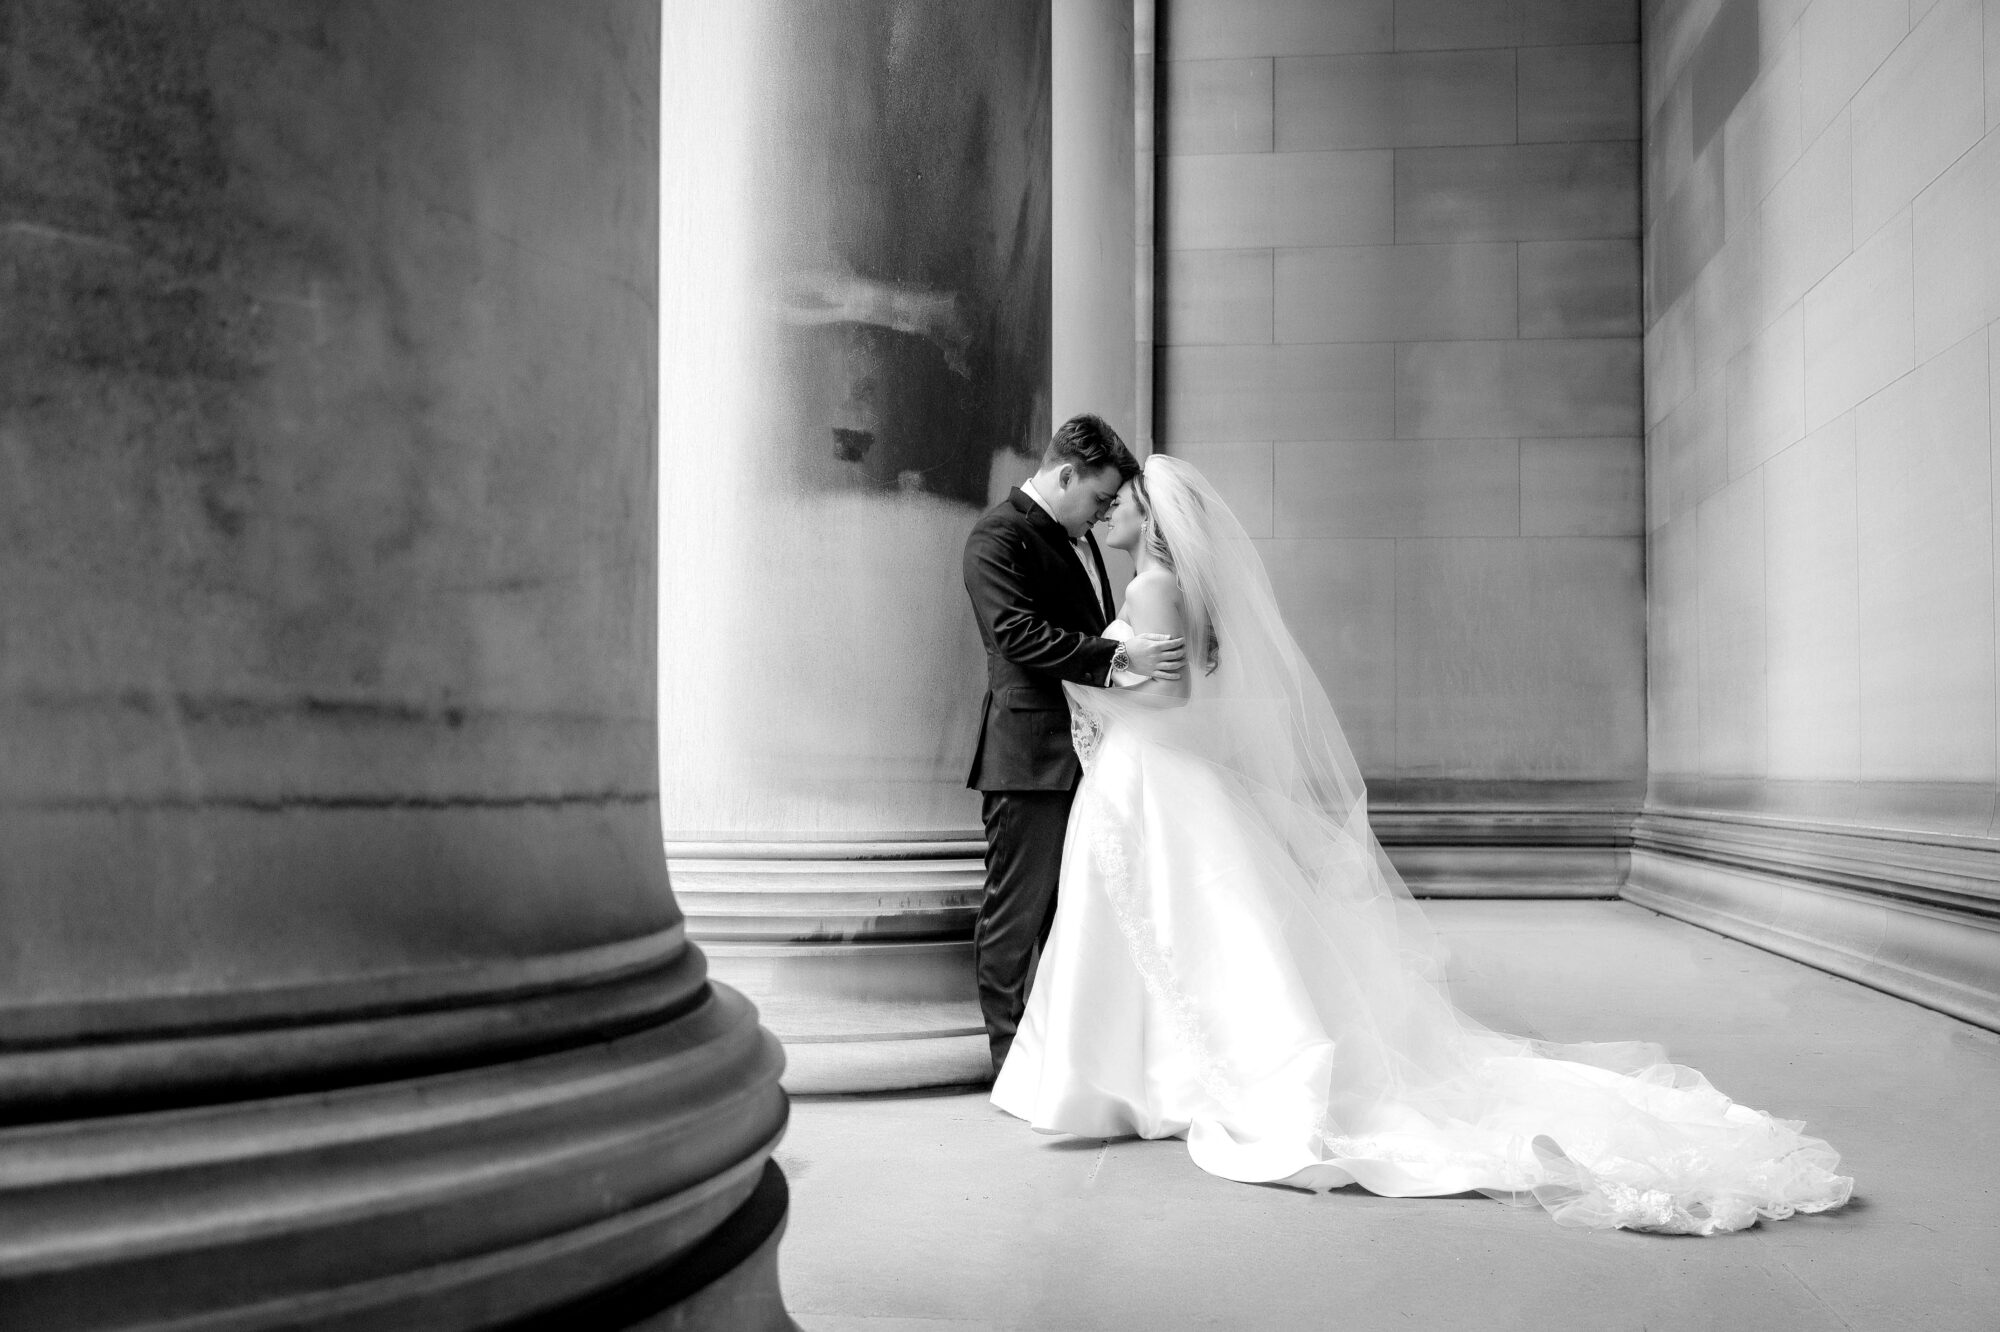 wedding couple in black and white photo at mellon institute columns • Stunning Duquesne Club Wedding Photos - An Elegant Wintery January Pittsburgh Marriage